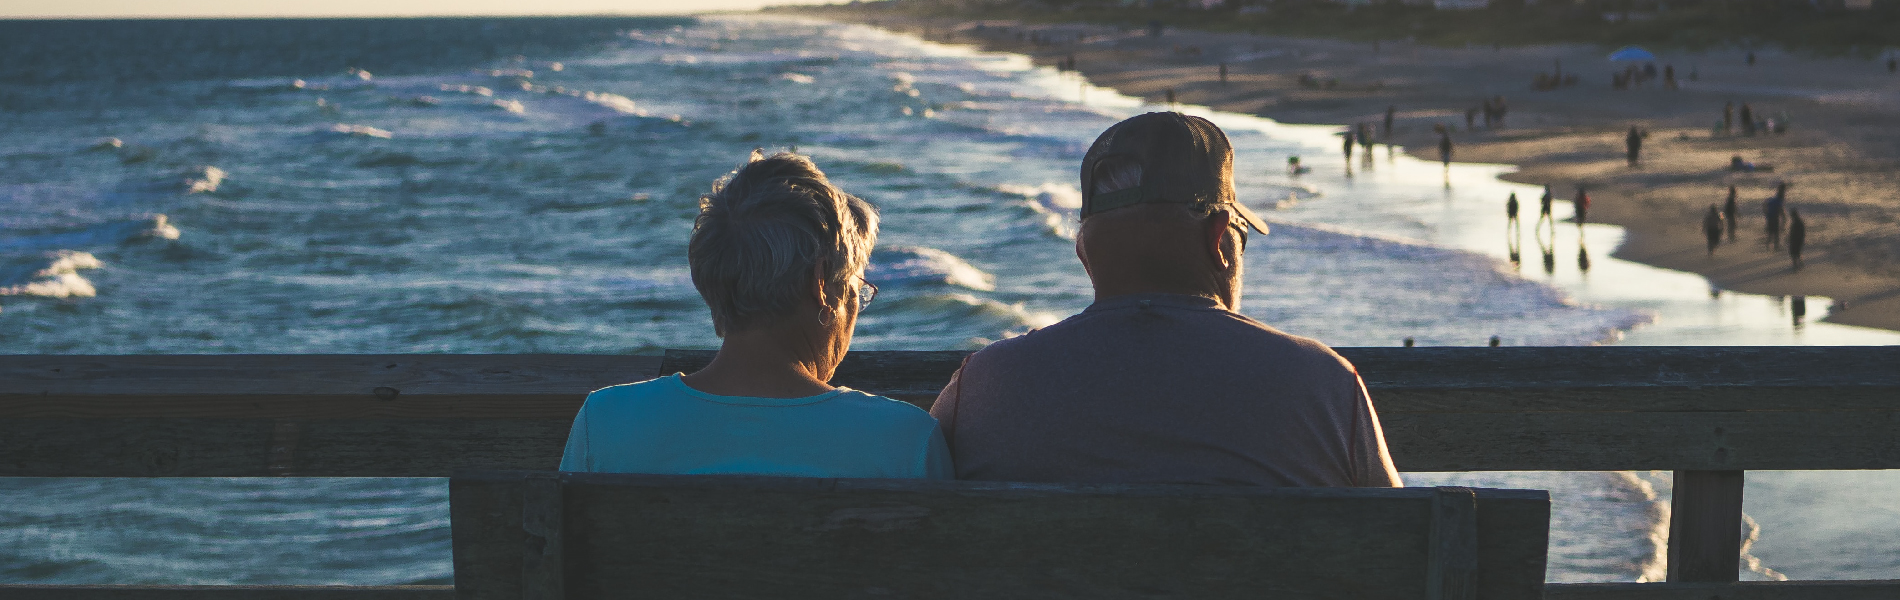 Elderly couple watching waves at the beach